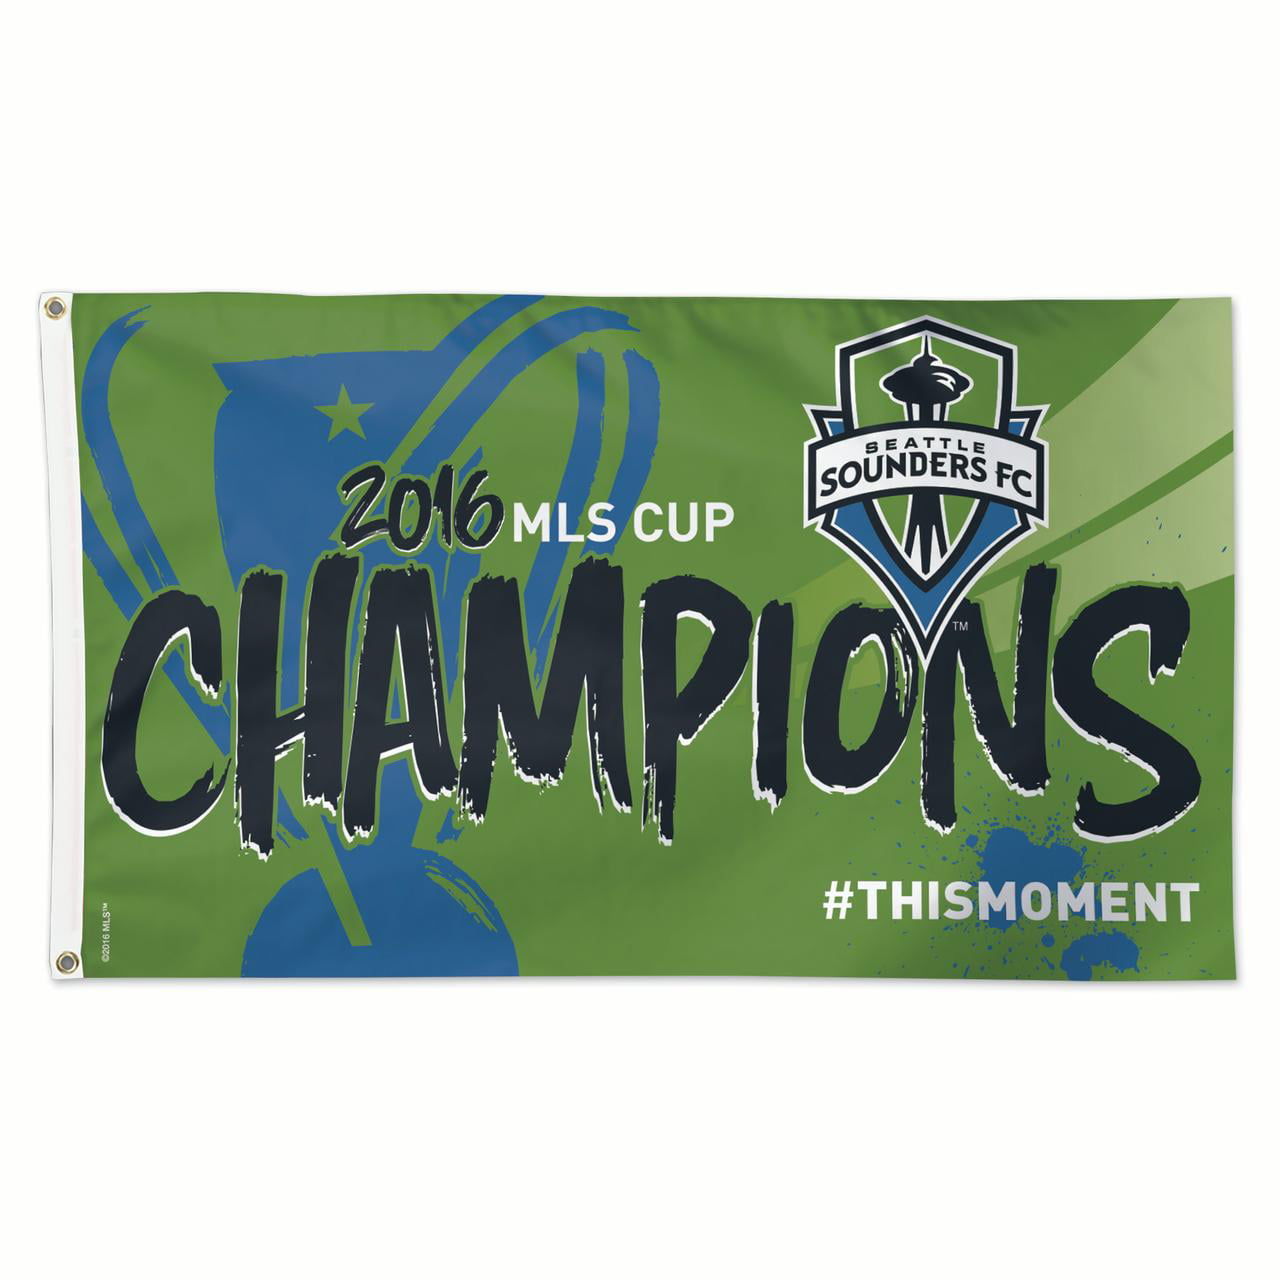 MLS Seattle Sounders FC Wincraft 2016 Cup Champions 27" x 37" Vertical Flag NEW! 